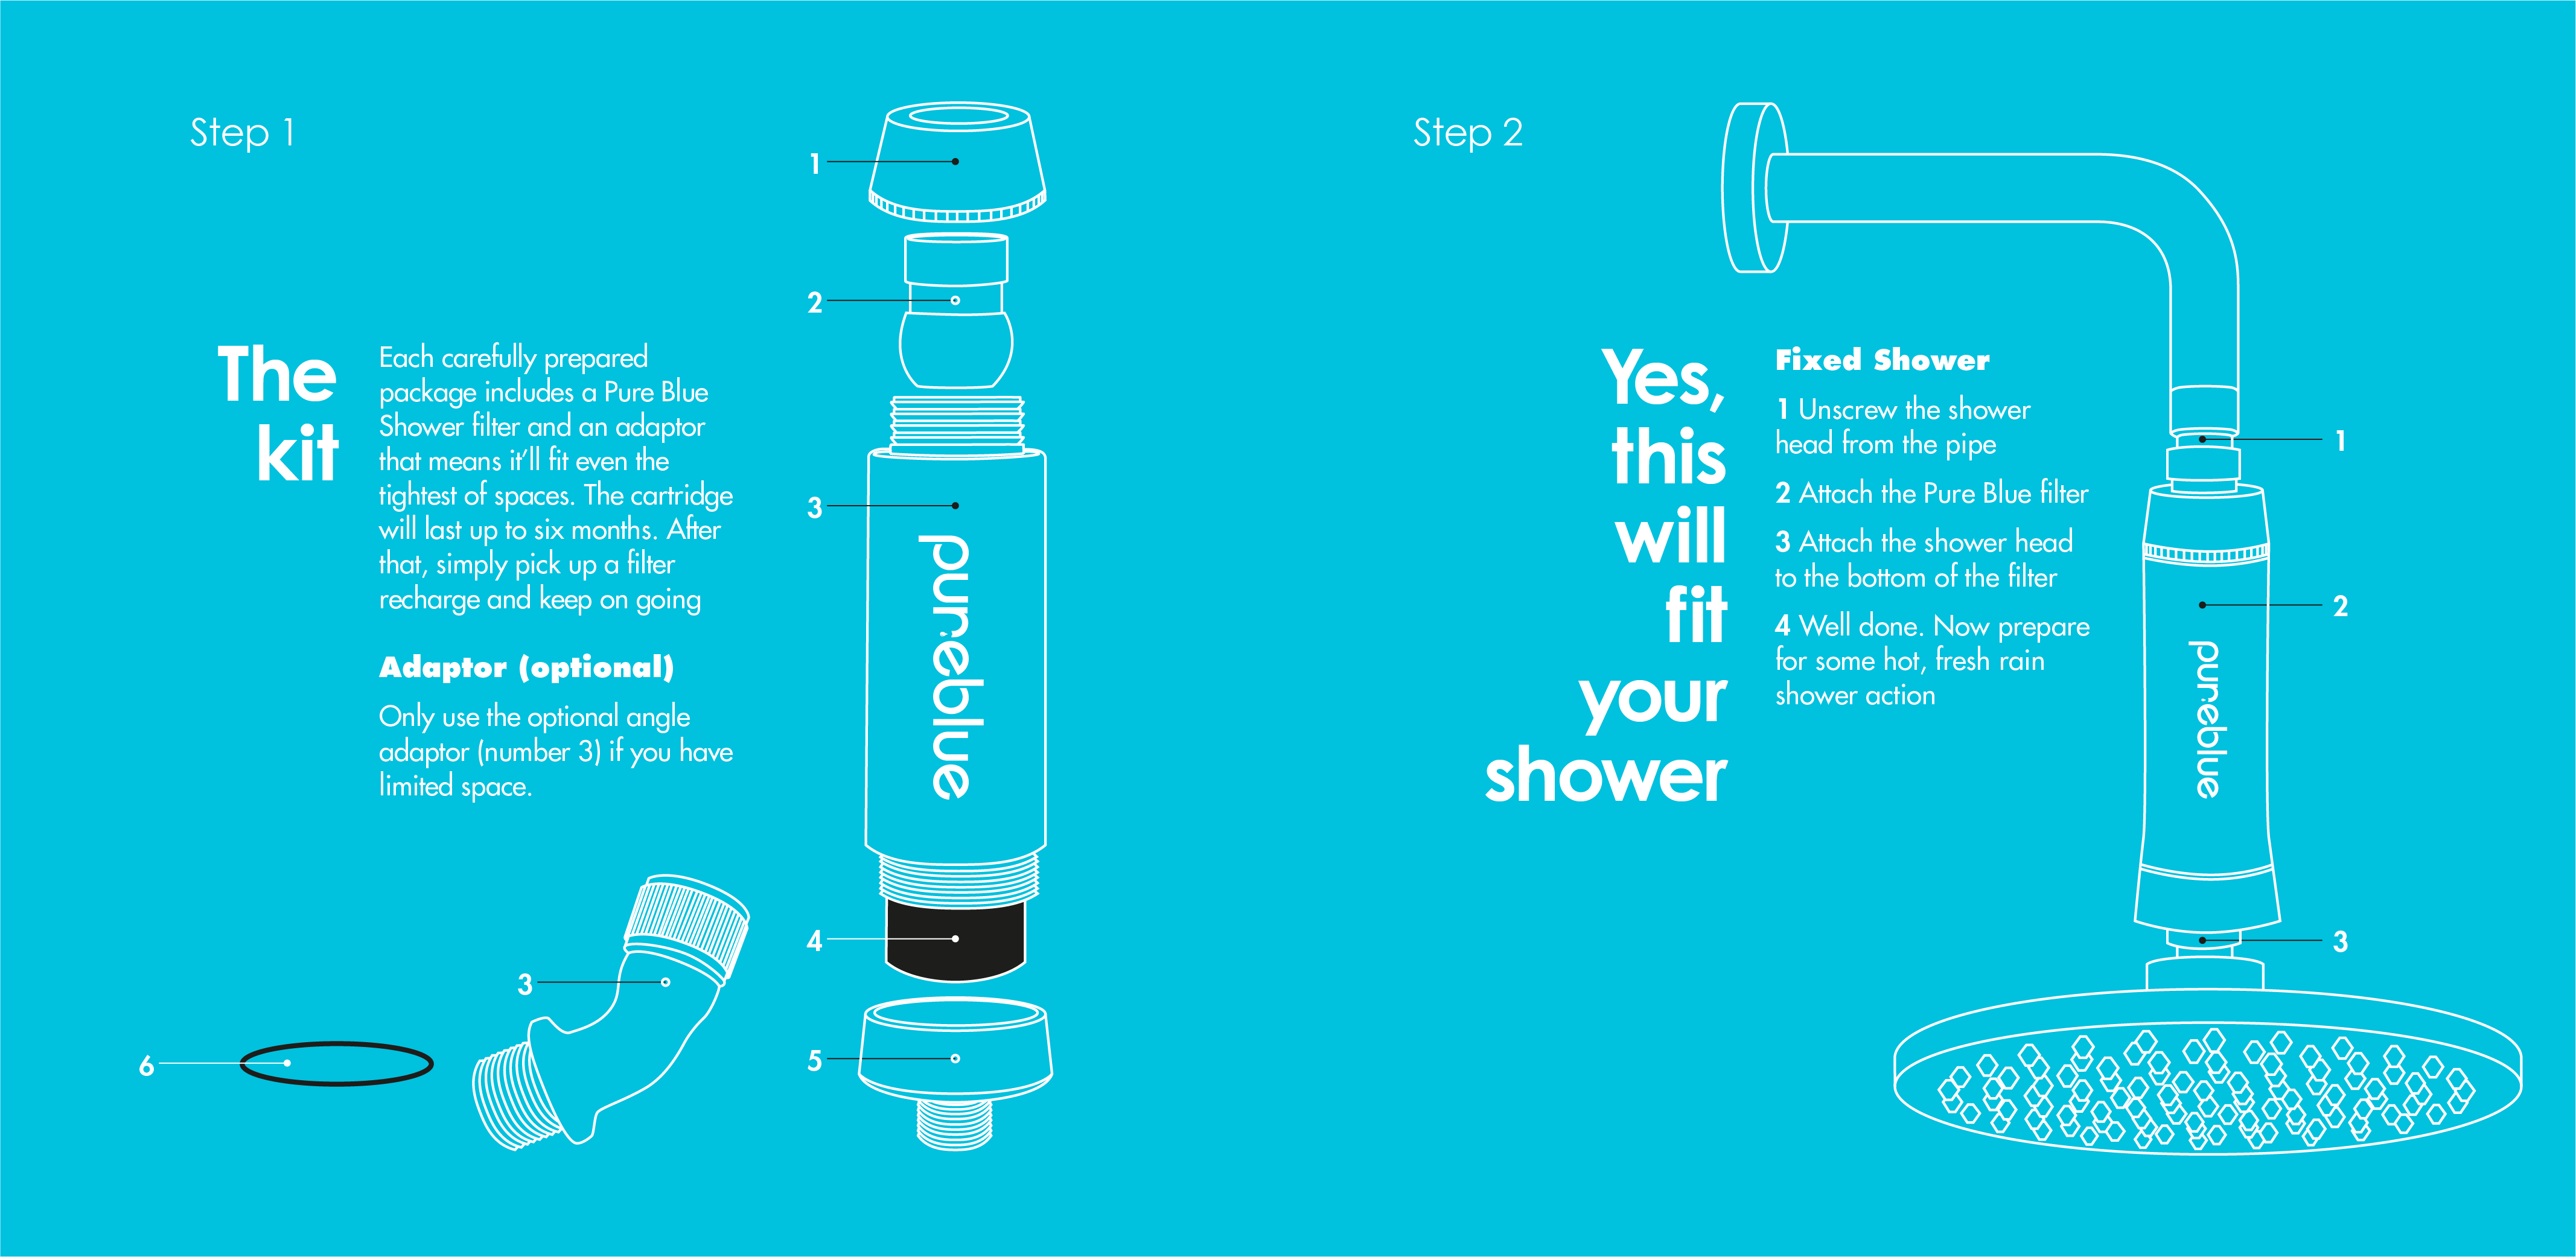 H2O Pure Blue Shower Filter Installation Guide - 2